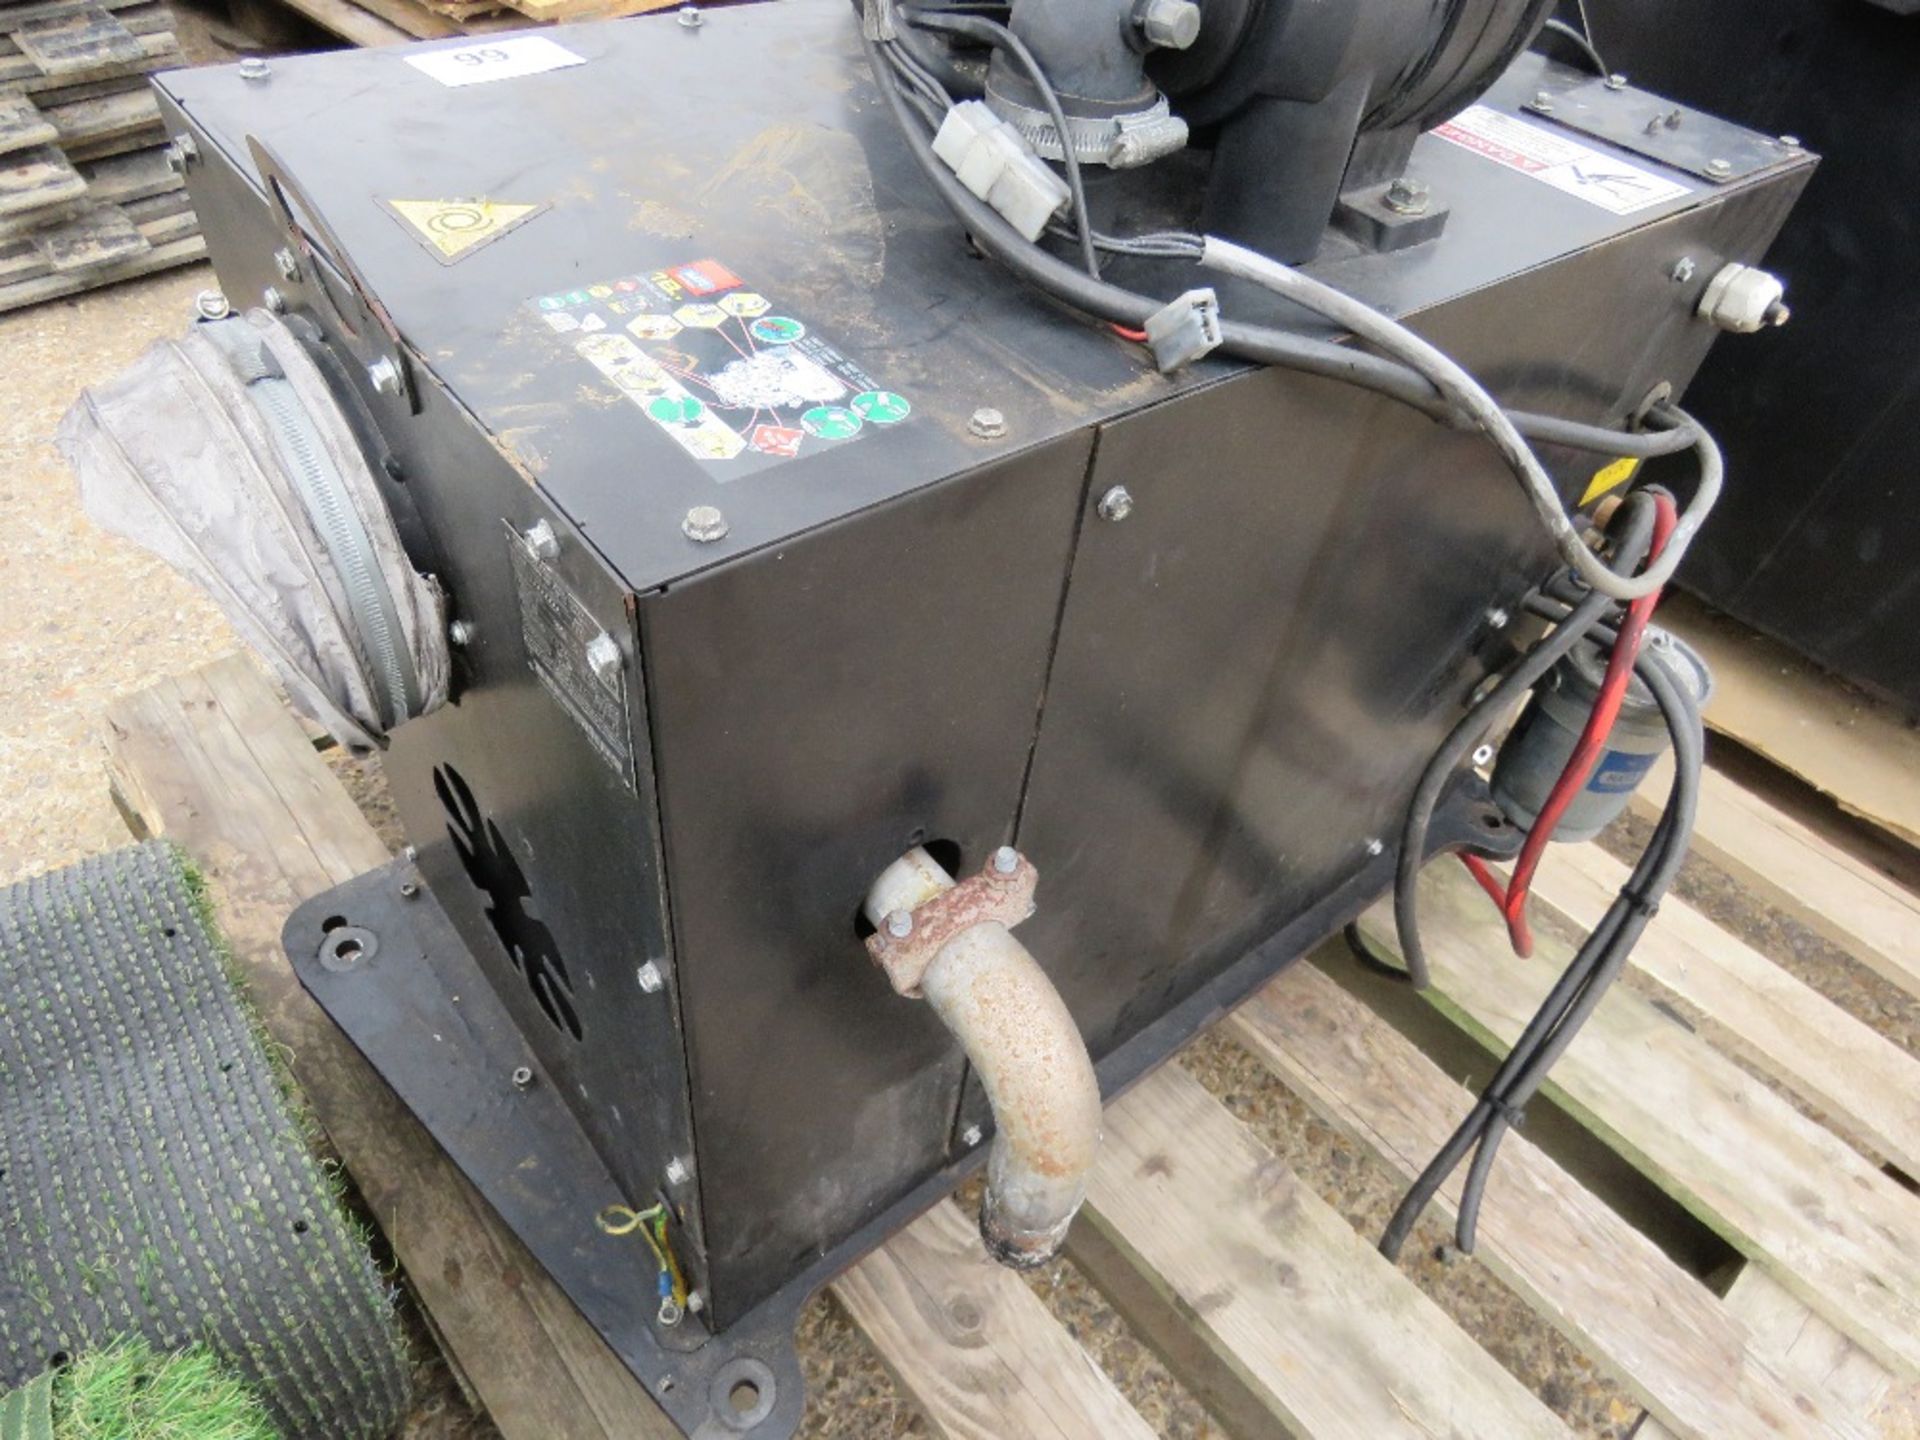 HATZ DIESEL ENGINED PACKAGED GENERATOR SET WITH CONTROL UNIT, 3.1KW RATED OUTPUT. - Image 5 of 6